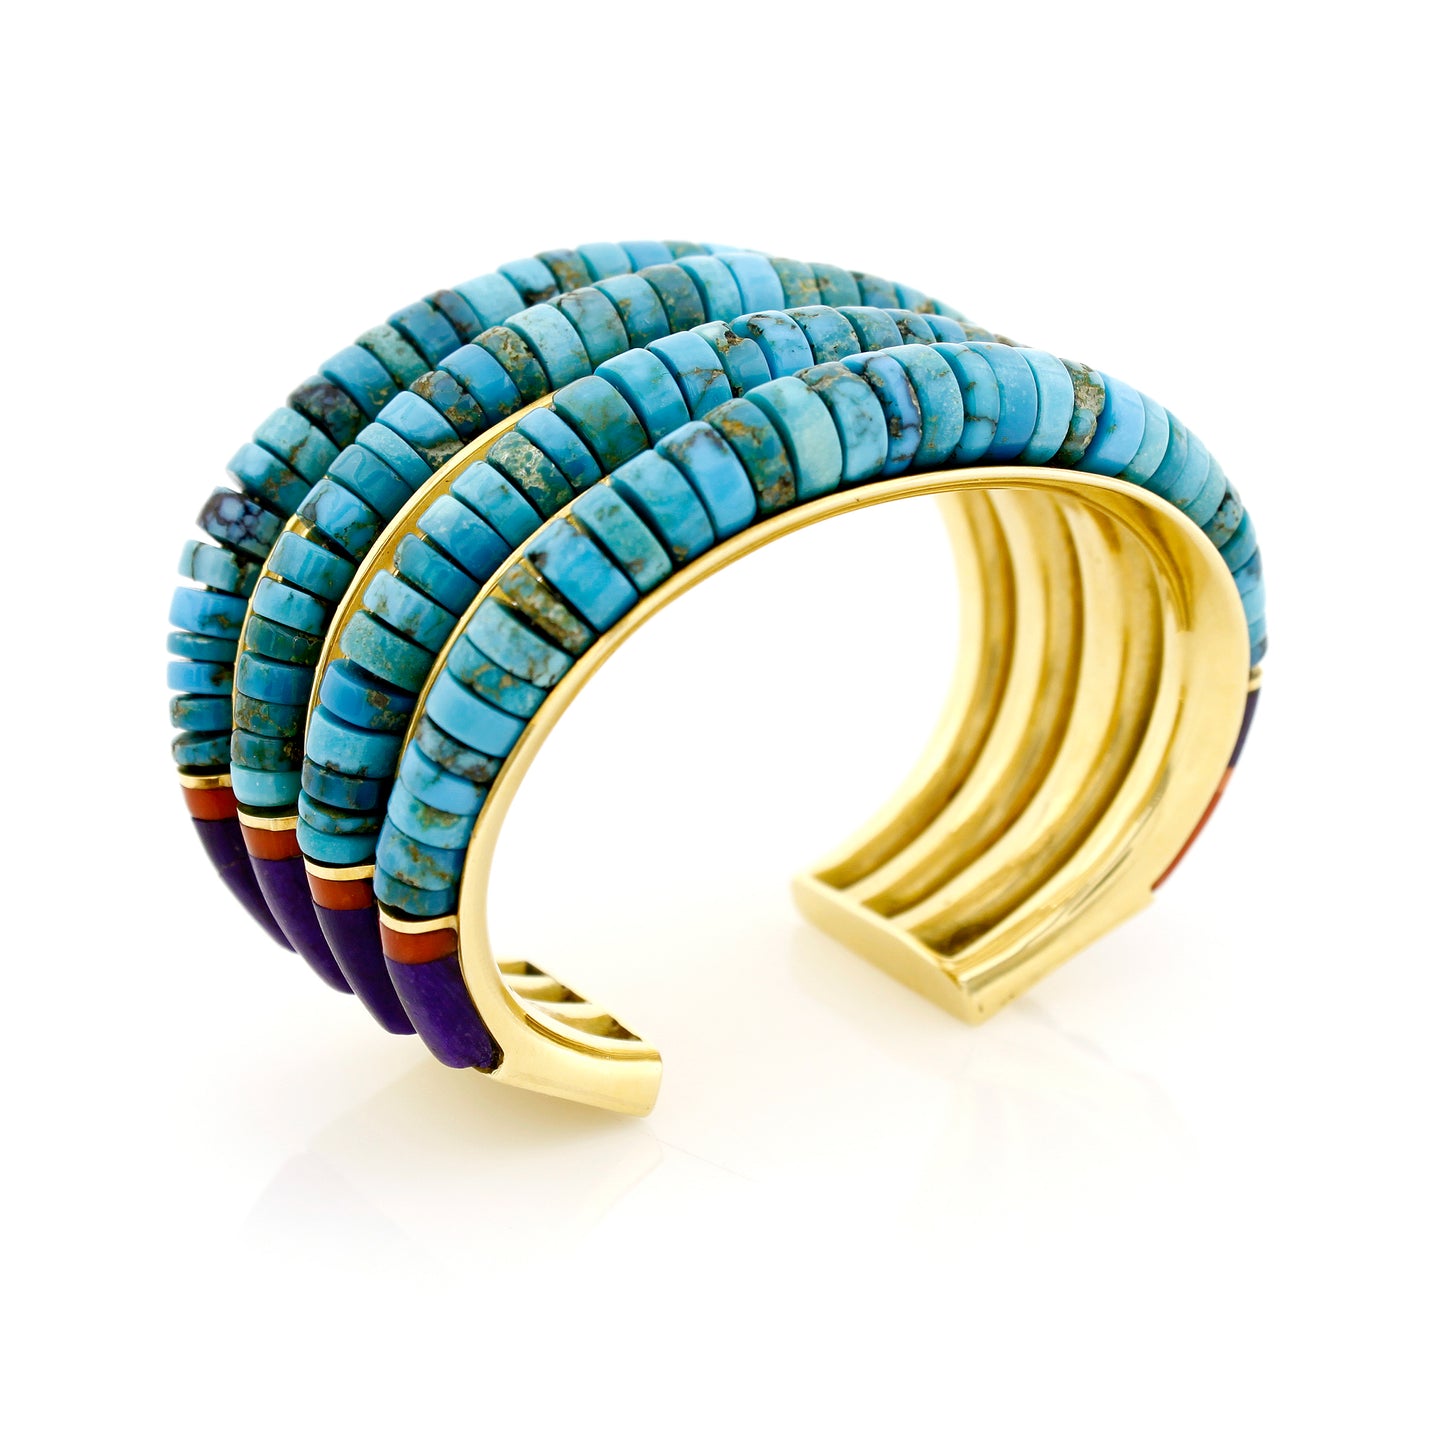 TURQUOISE, CORAL, SUGALITE, AND GOLD BRACELET AND RING BY CHARLES LOLOMA, HOTEVILLA, ARIZONA , CIRCA 1975